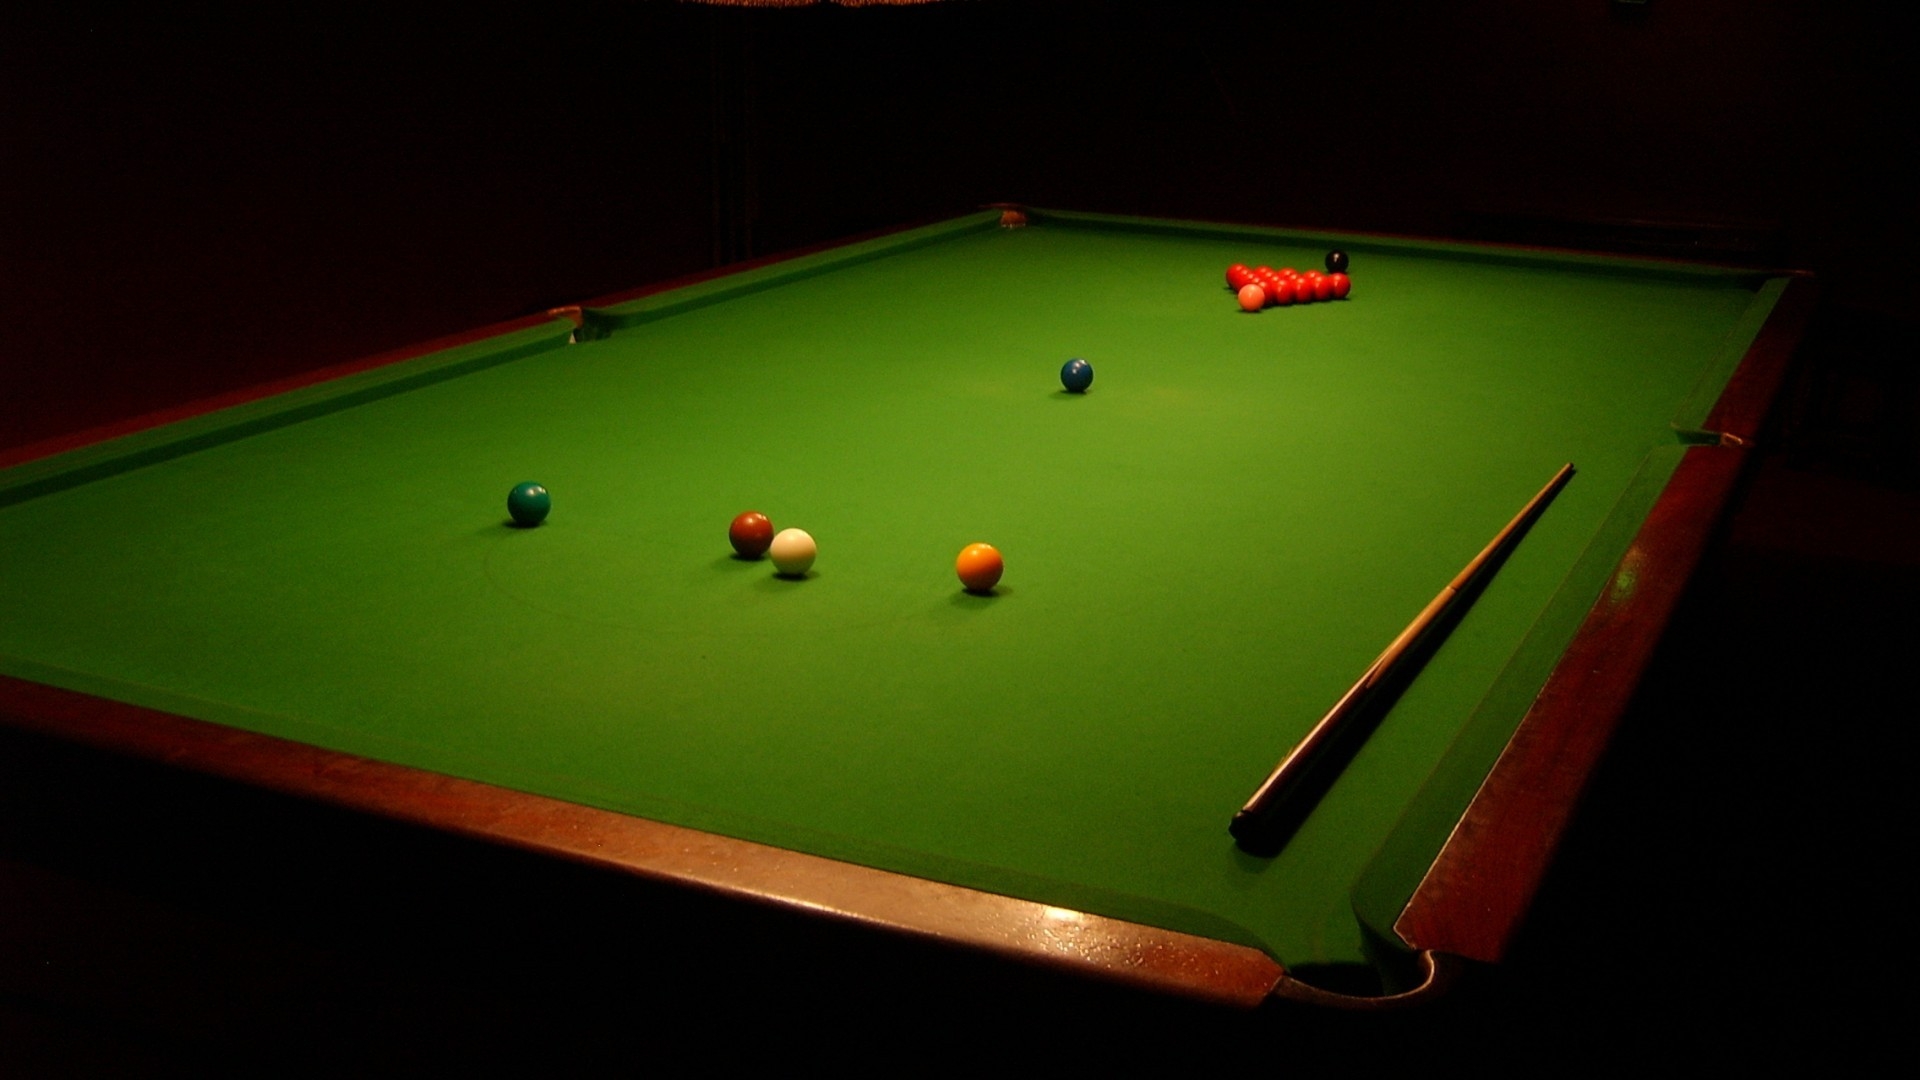 Snooker Table for 1920 x 1080 HDTV 1080p resolution